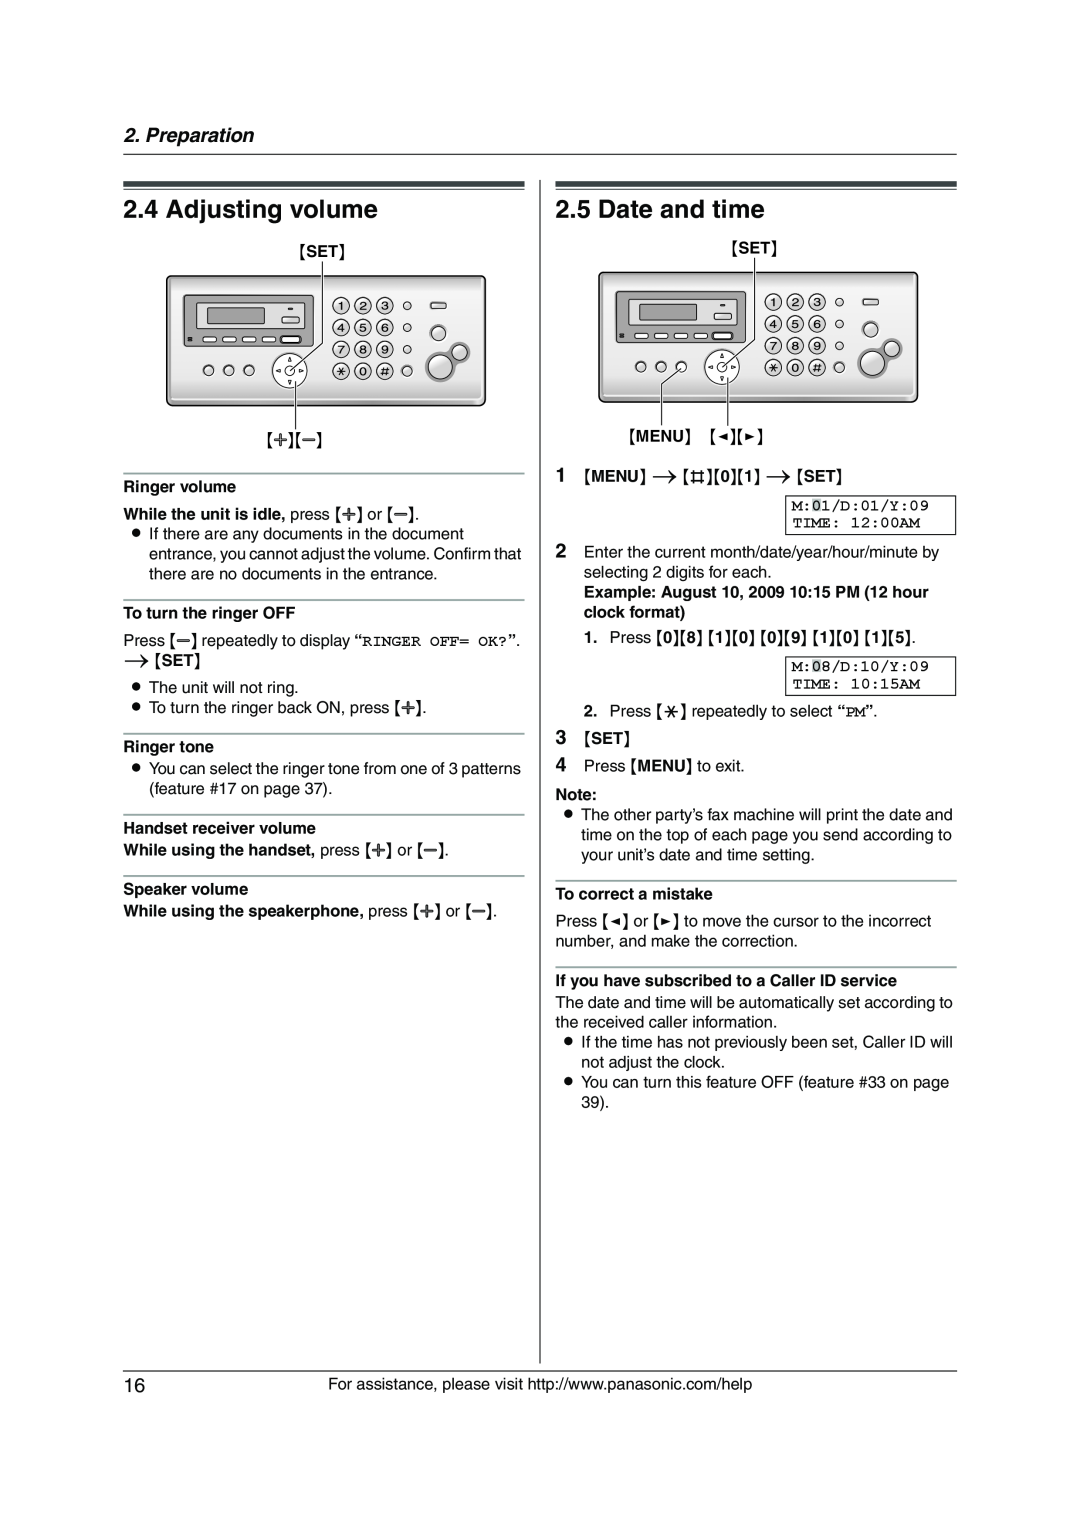 Panasonic KX-FP215 Adjusting volume, Date and time, Preparation, M01/D01/Y09 TIME 1200AM, M08/D10/Y09 TIME 1015AM 